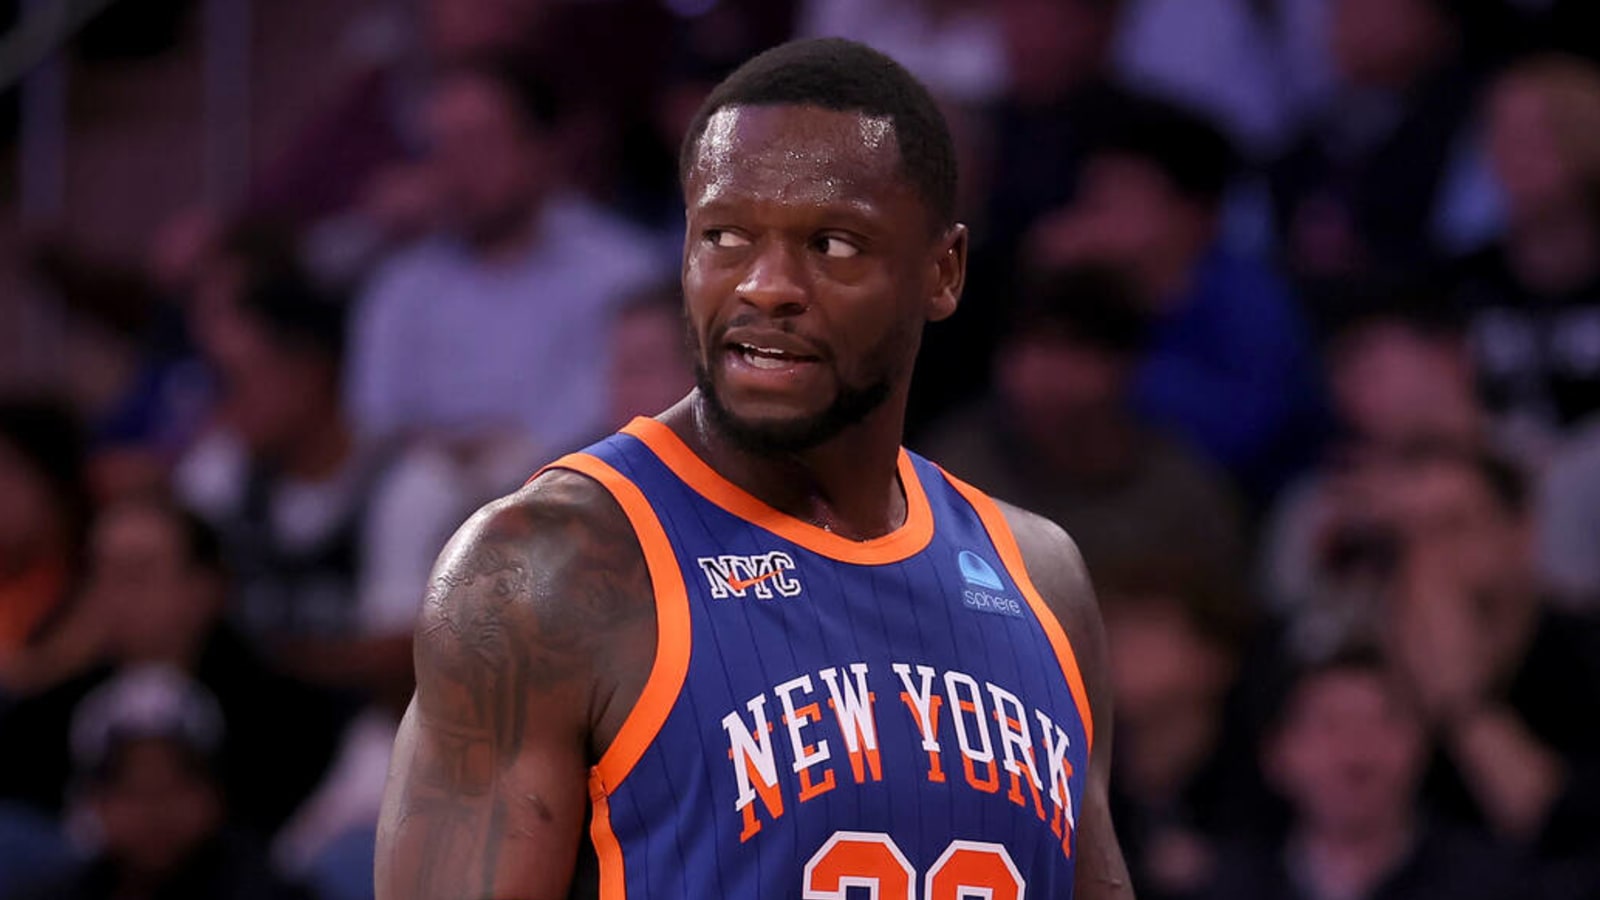 Julius Randle clashing with Knicks over load management attempts?